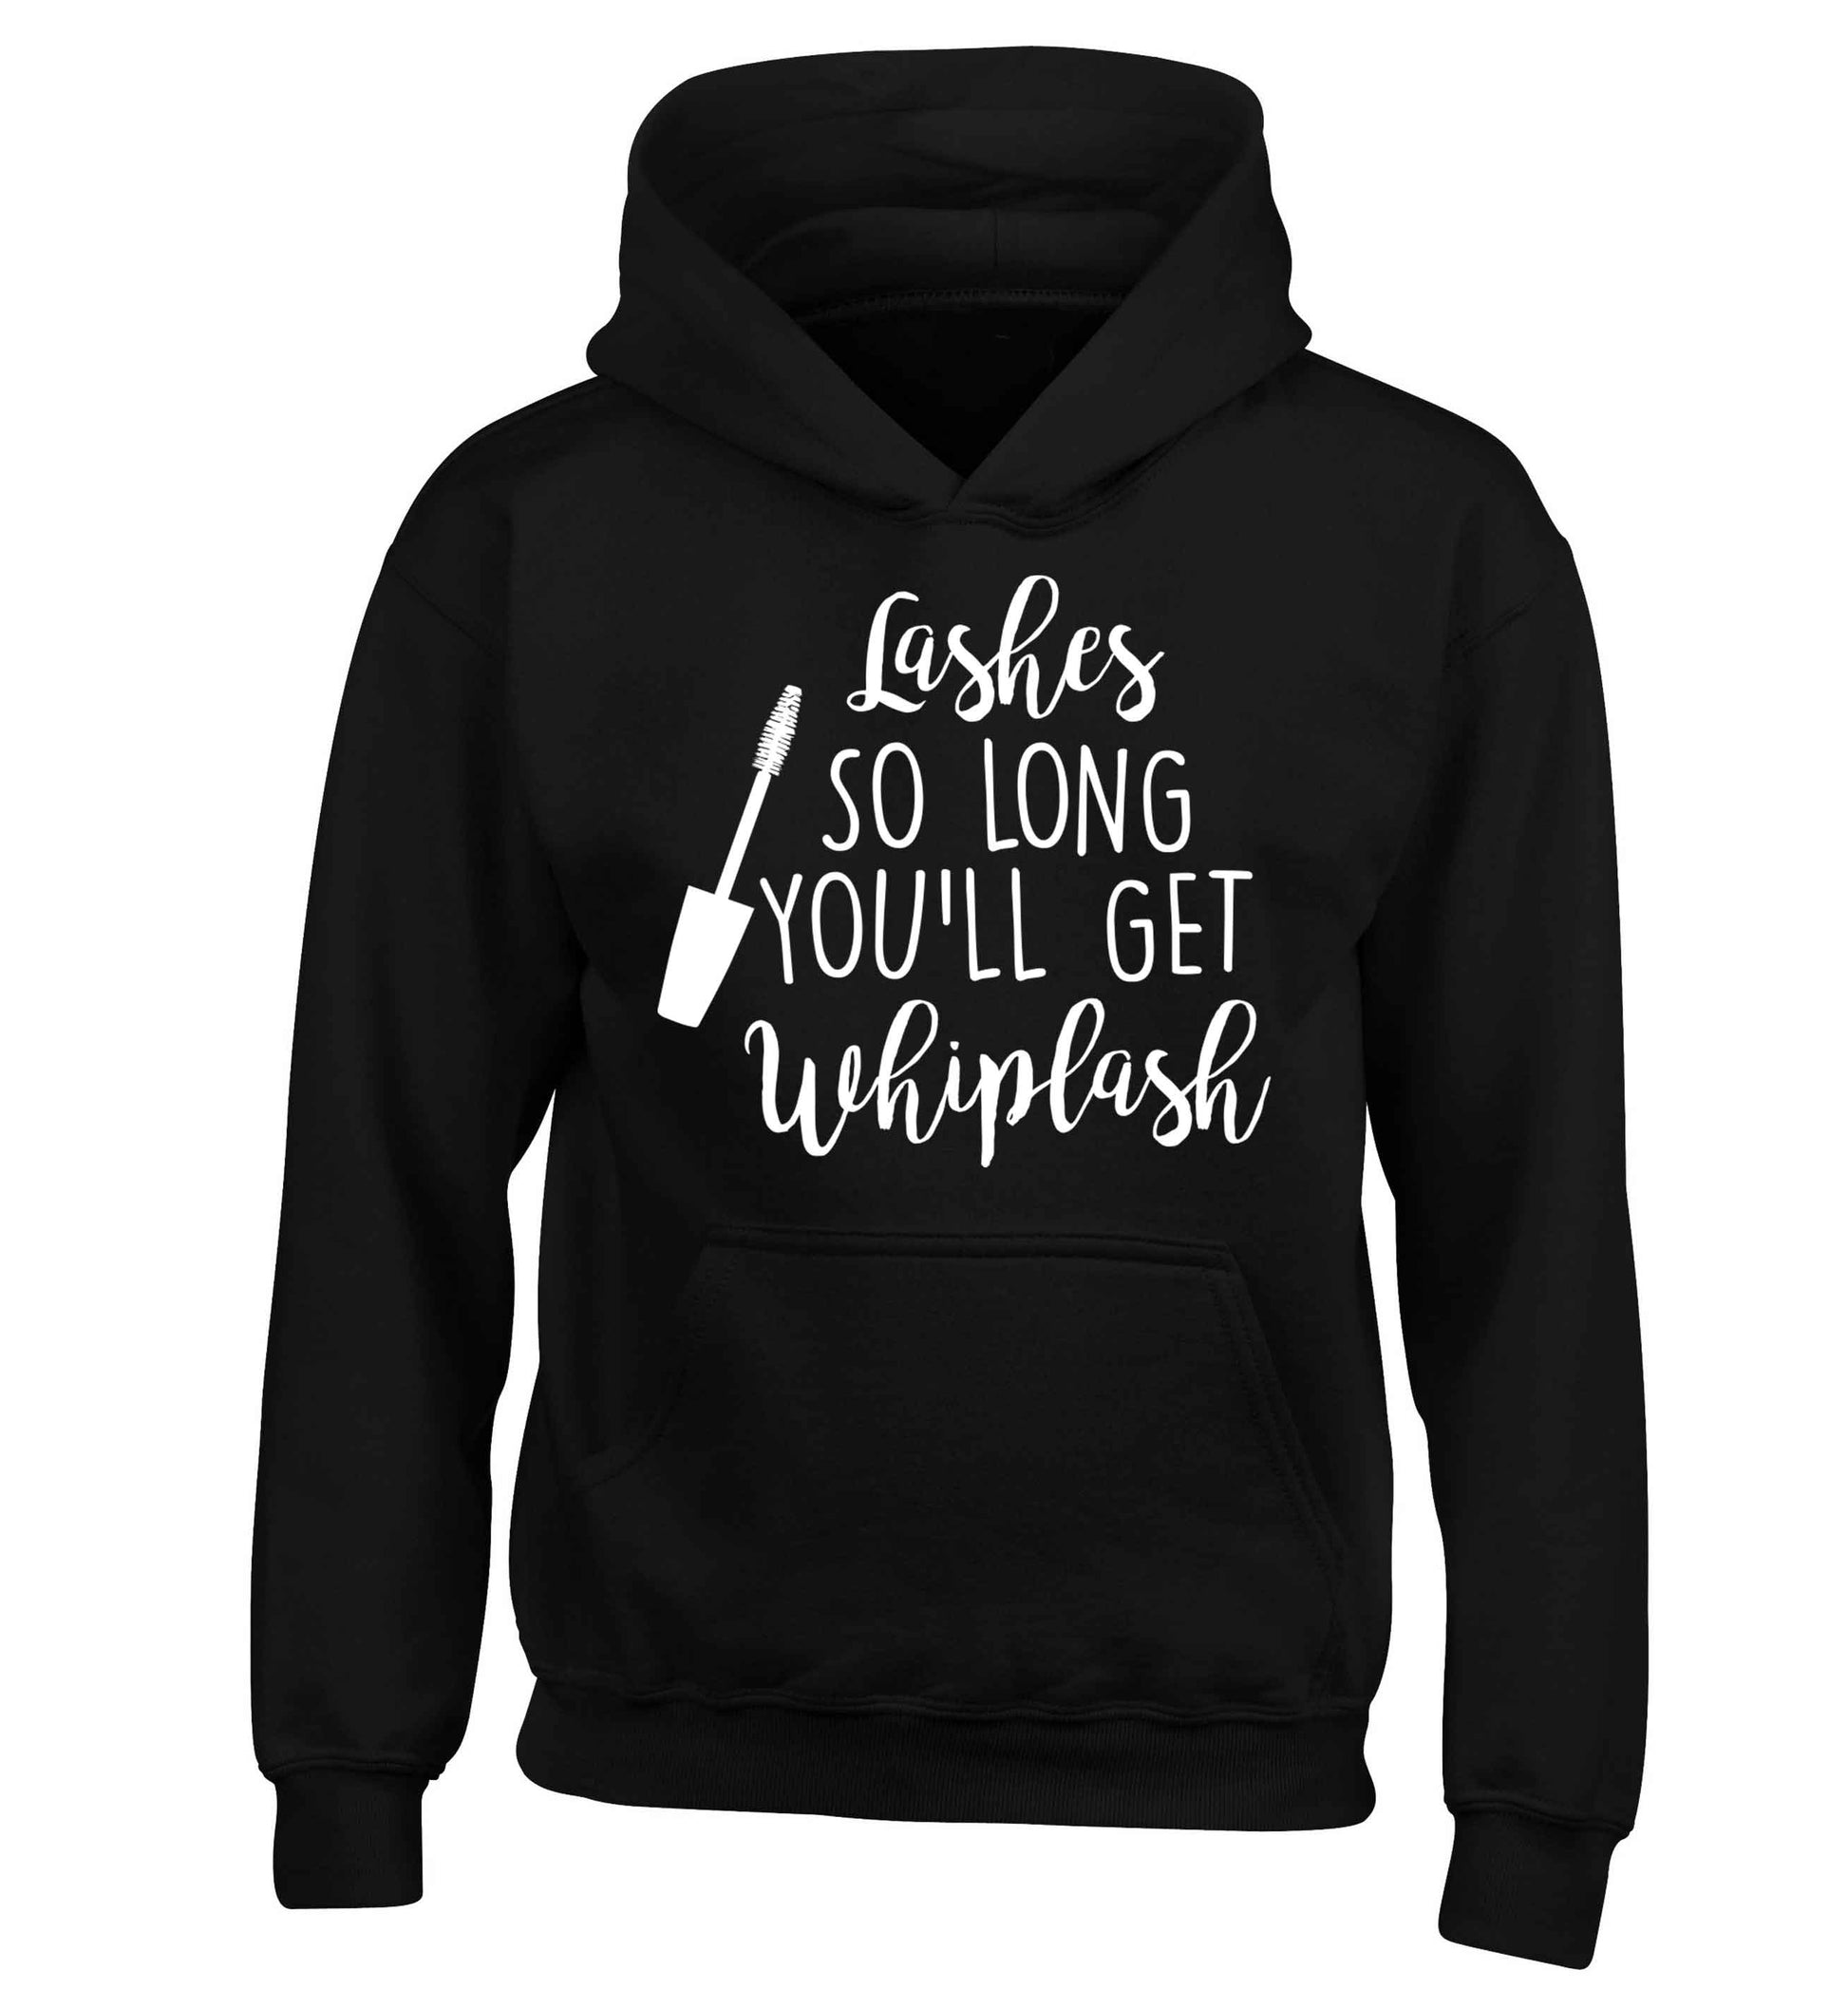 Lashes so long you'll get whiplash children's black hoodie 12-13 Years